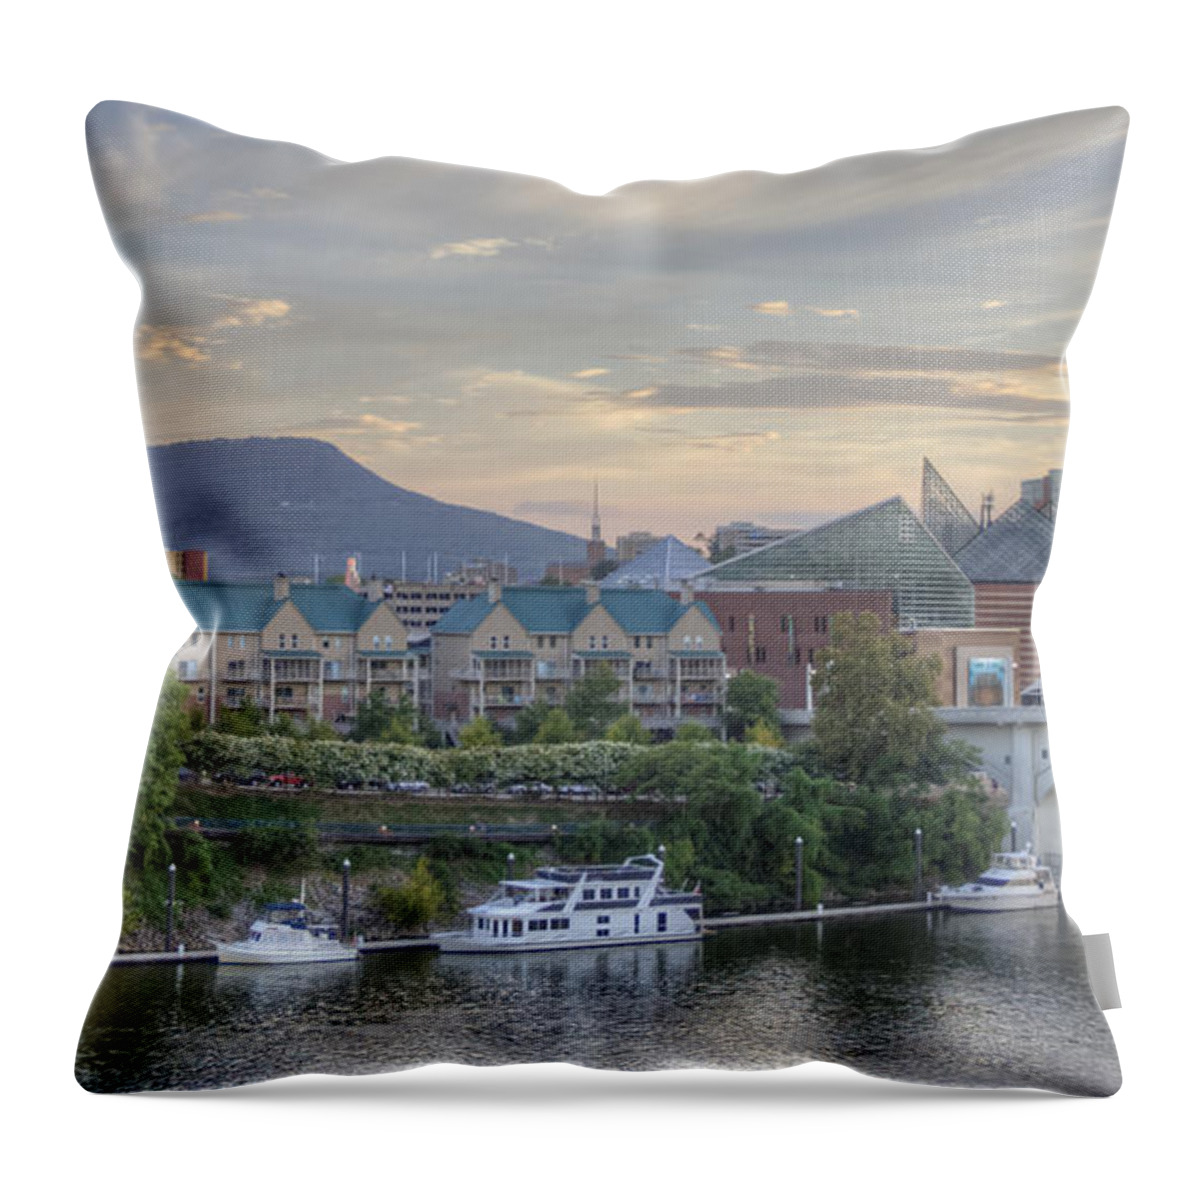 Chattanooga Throw Pillow featuring the photograph The Mountain by David Troxel